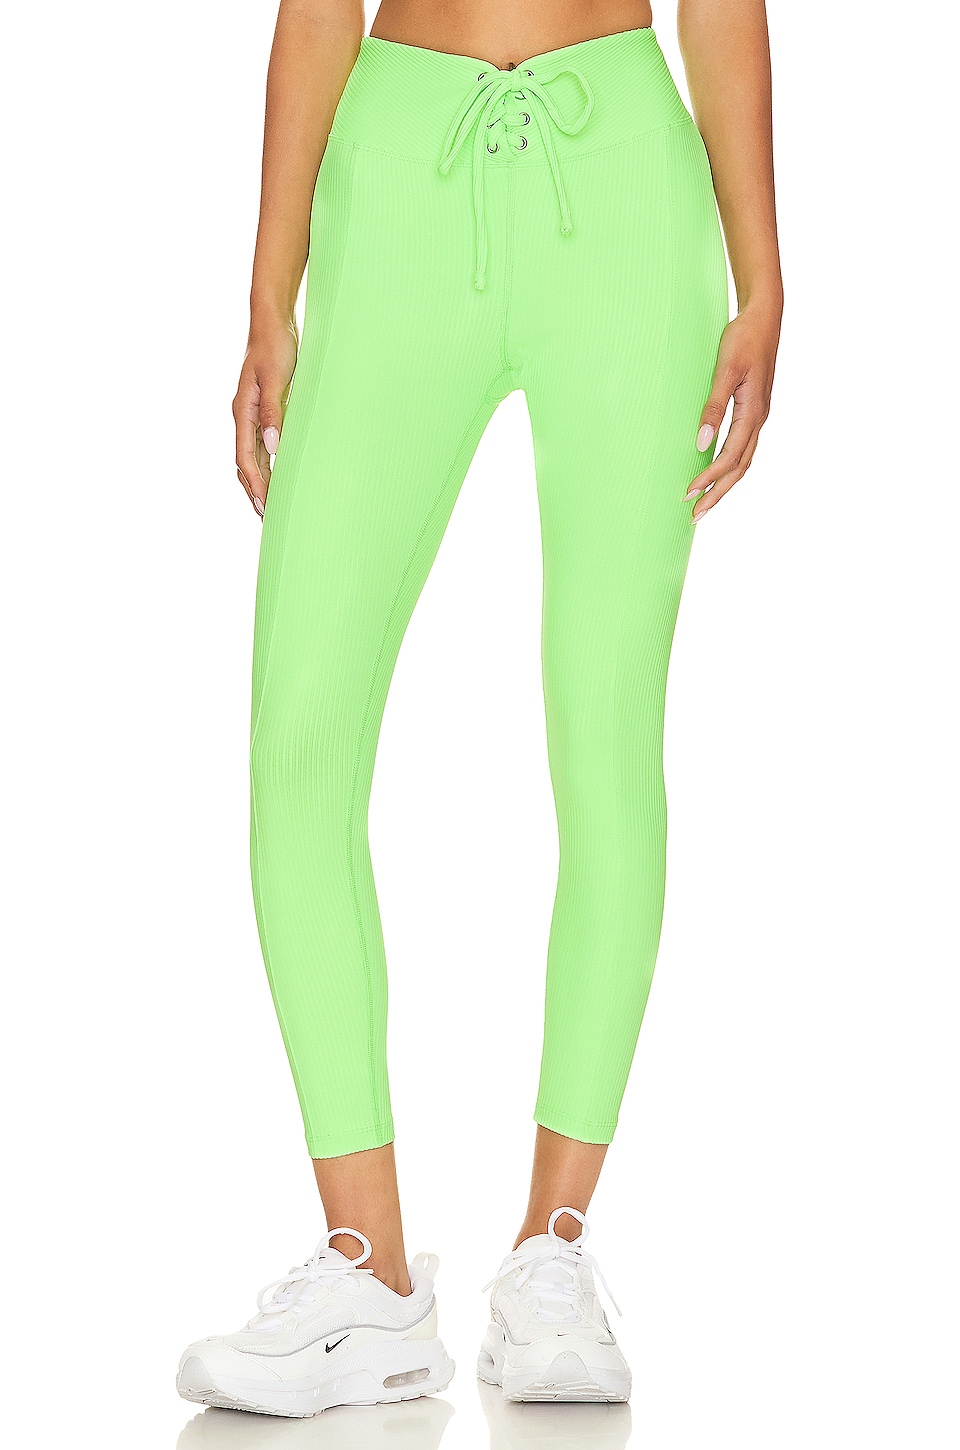 YEAR OF OURS Ribbed Football Legging in Neon Kiwi